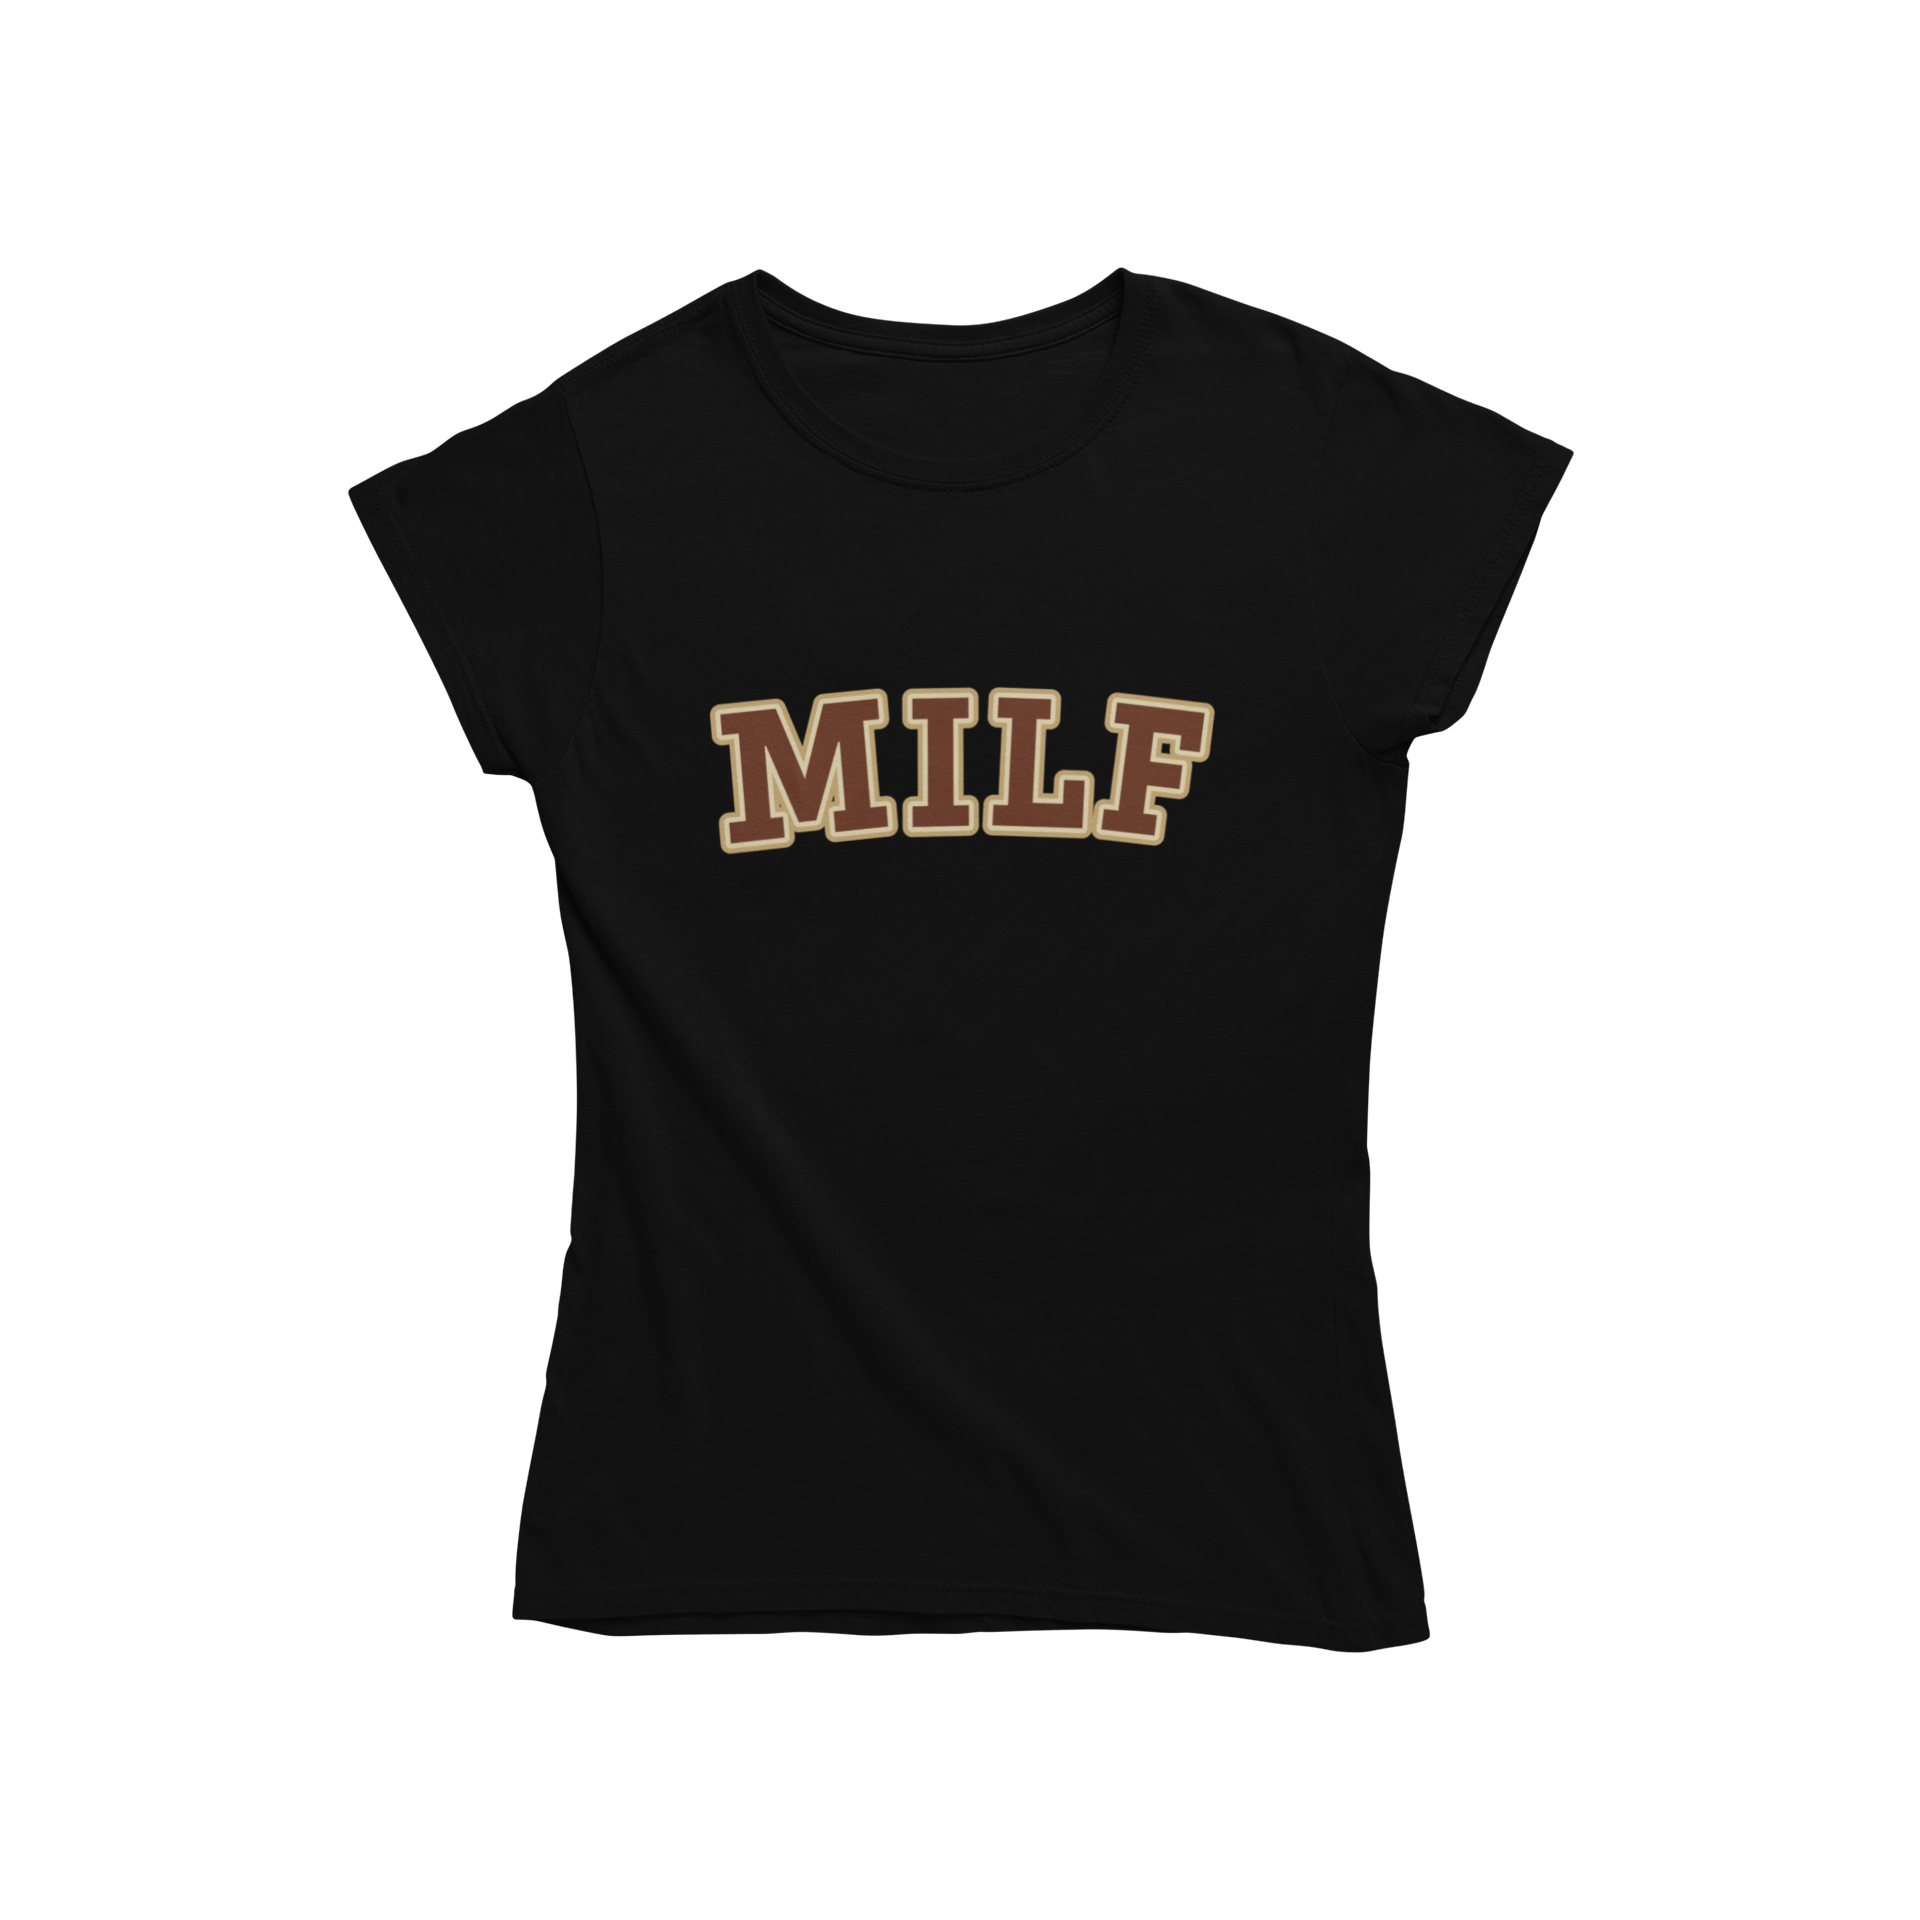 Looking for a fun, stylish t-shirt that shows off your inner MILF? Look no further than Teevolution! Our women's fitted t-shirts with "MILF" in contrasting colors are sure to turn heads and help you unleash your inner confidence. Shop now and feel like a confident, sexy mum!